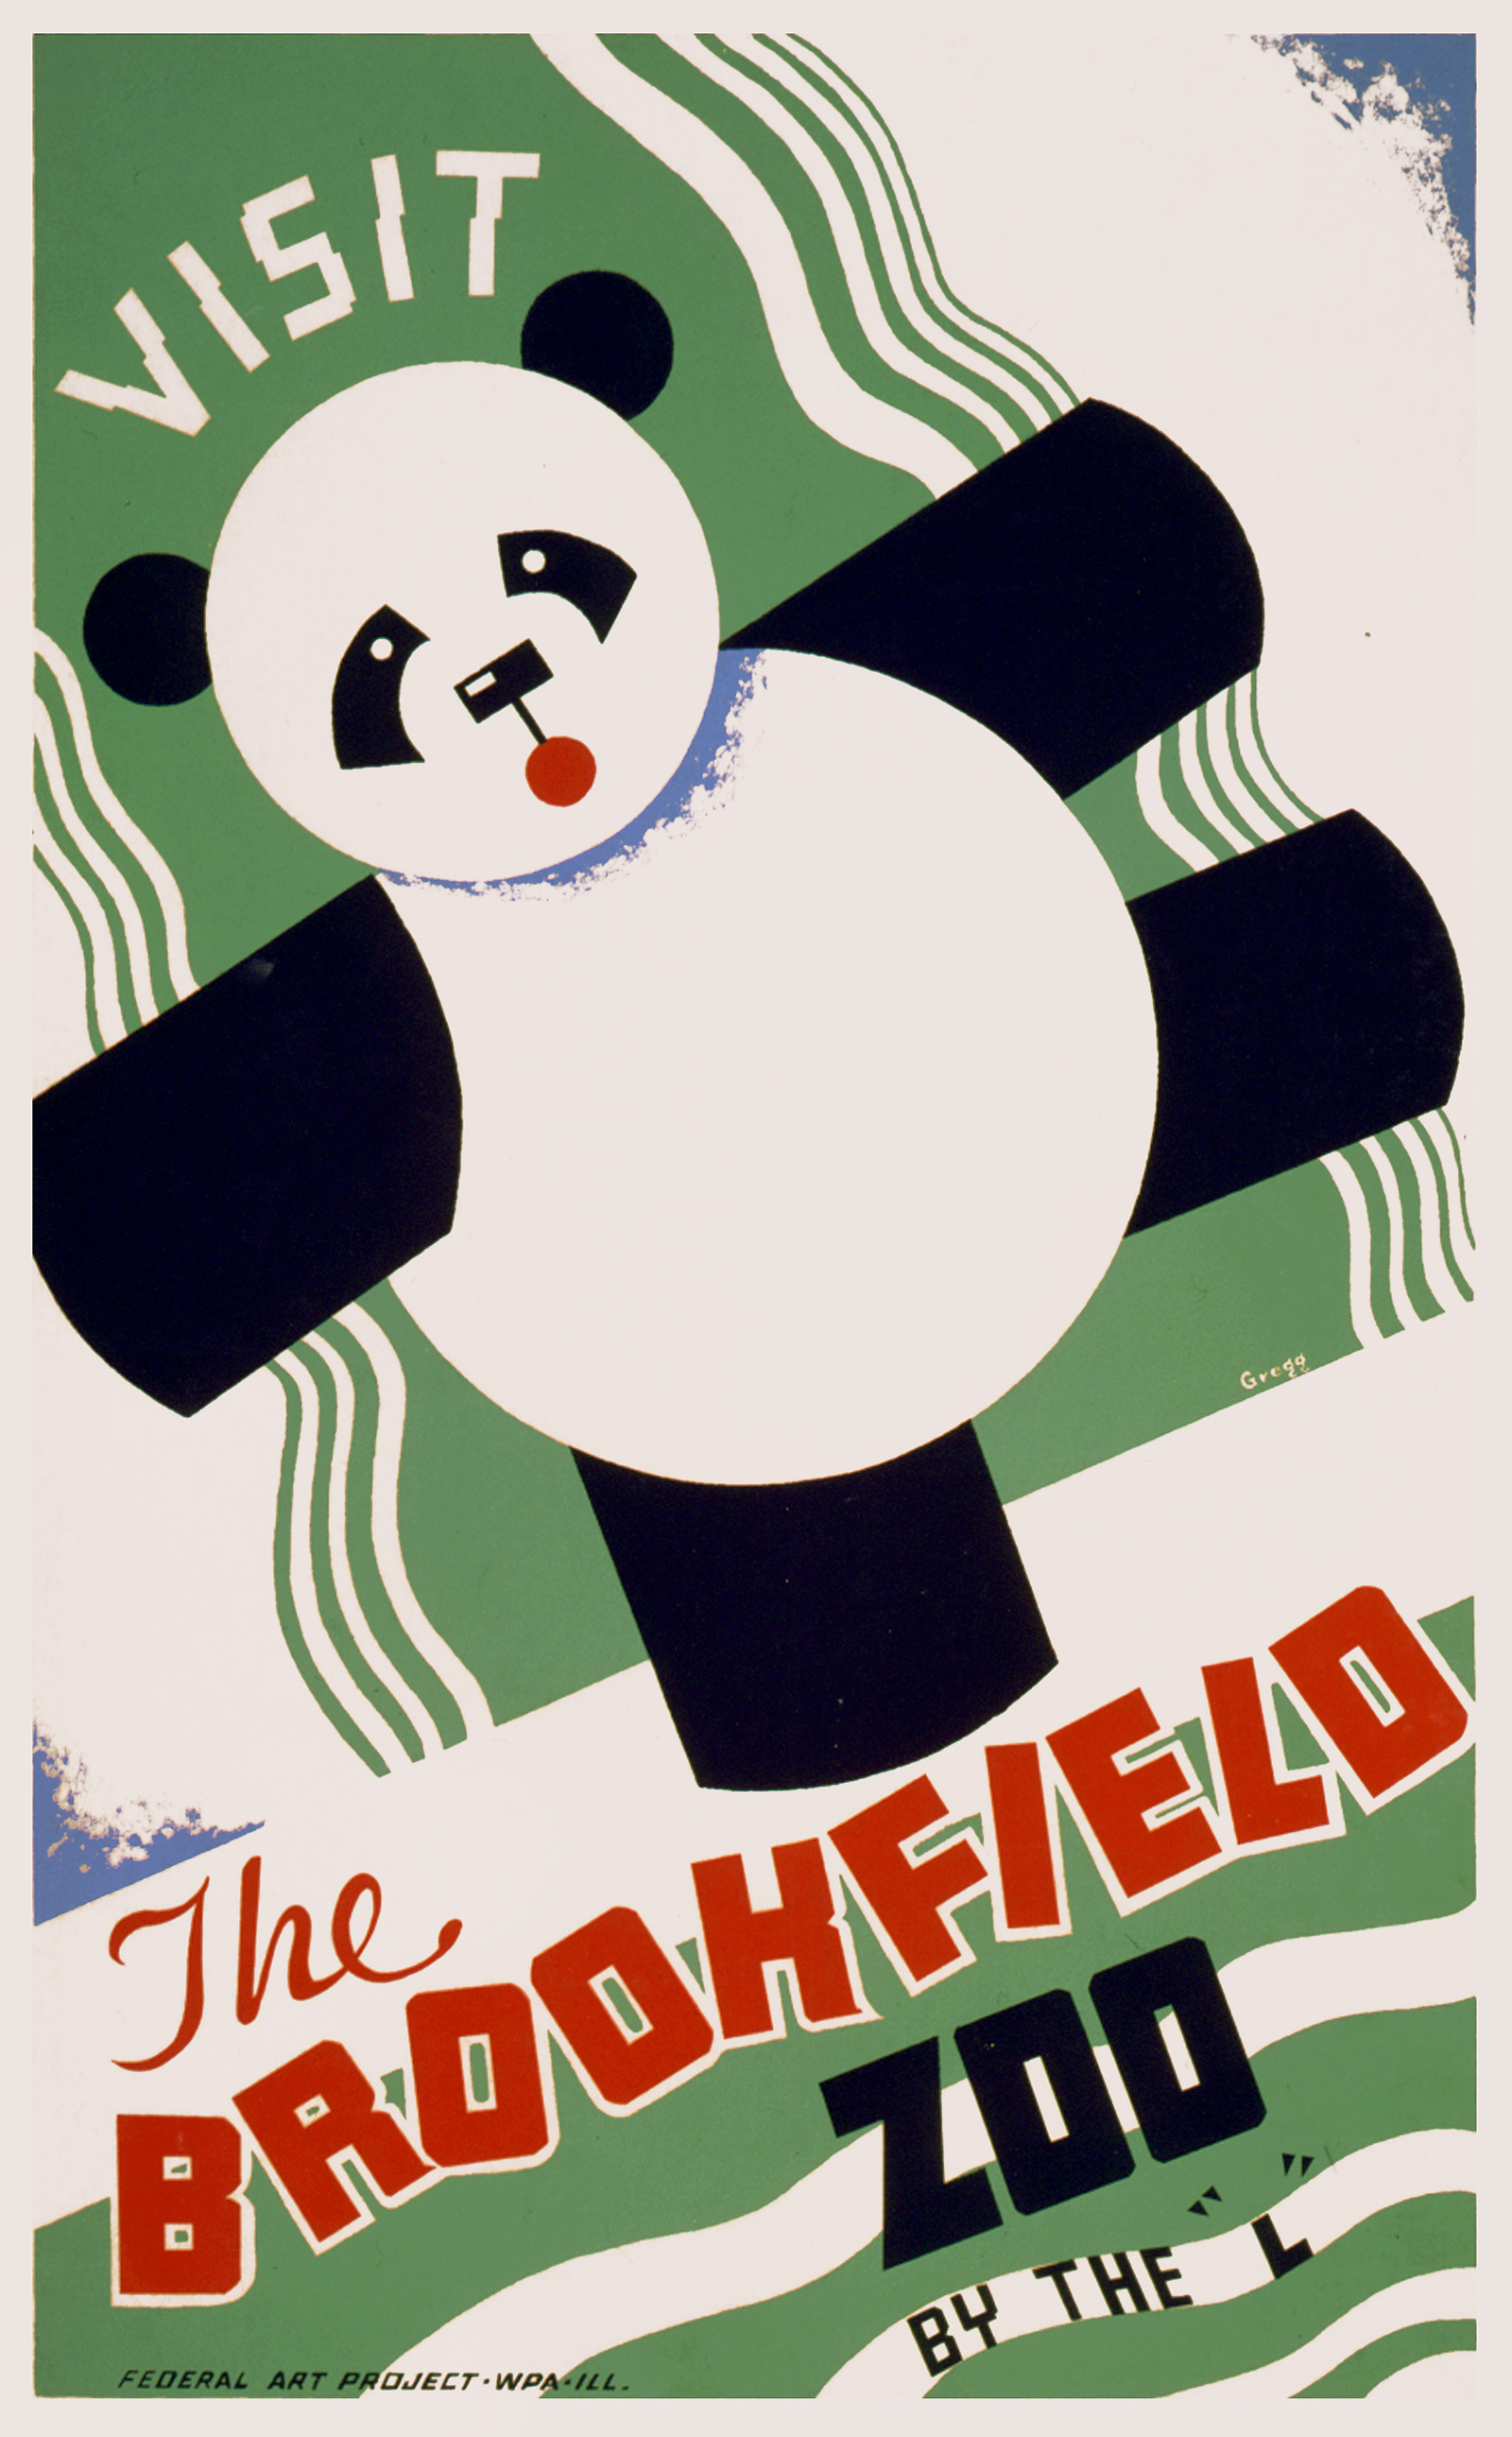 A nineteen thirty-eight Work Projects Administration illustrated poster designed by Gregg Arlington to promote Chicago’s Brookfield Zoo, Su-Lin’s home in the United States.